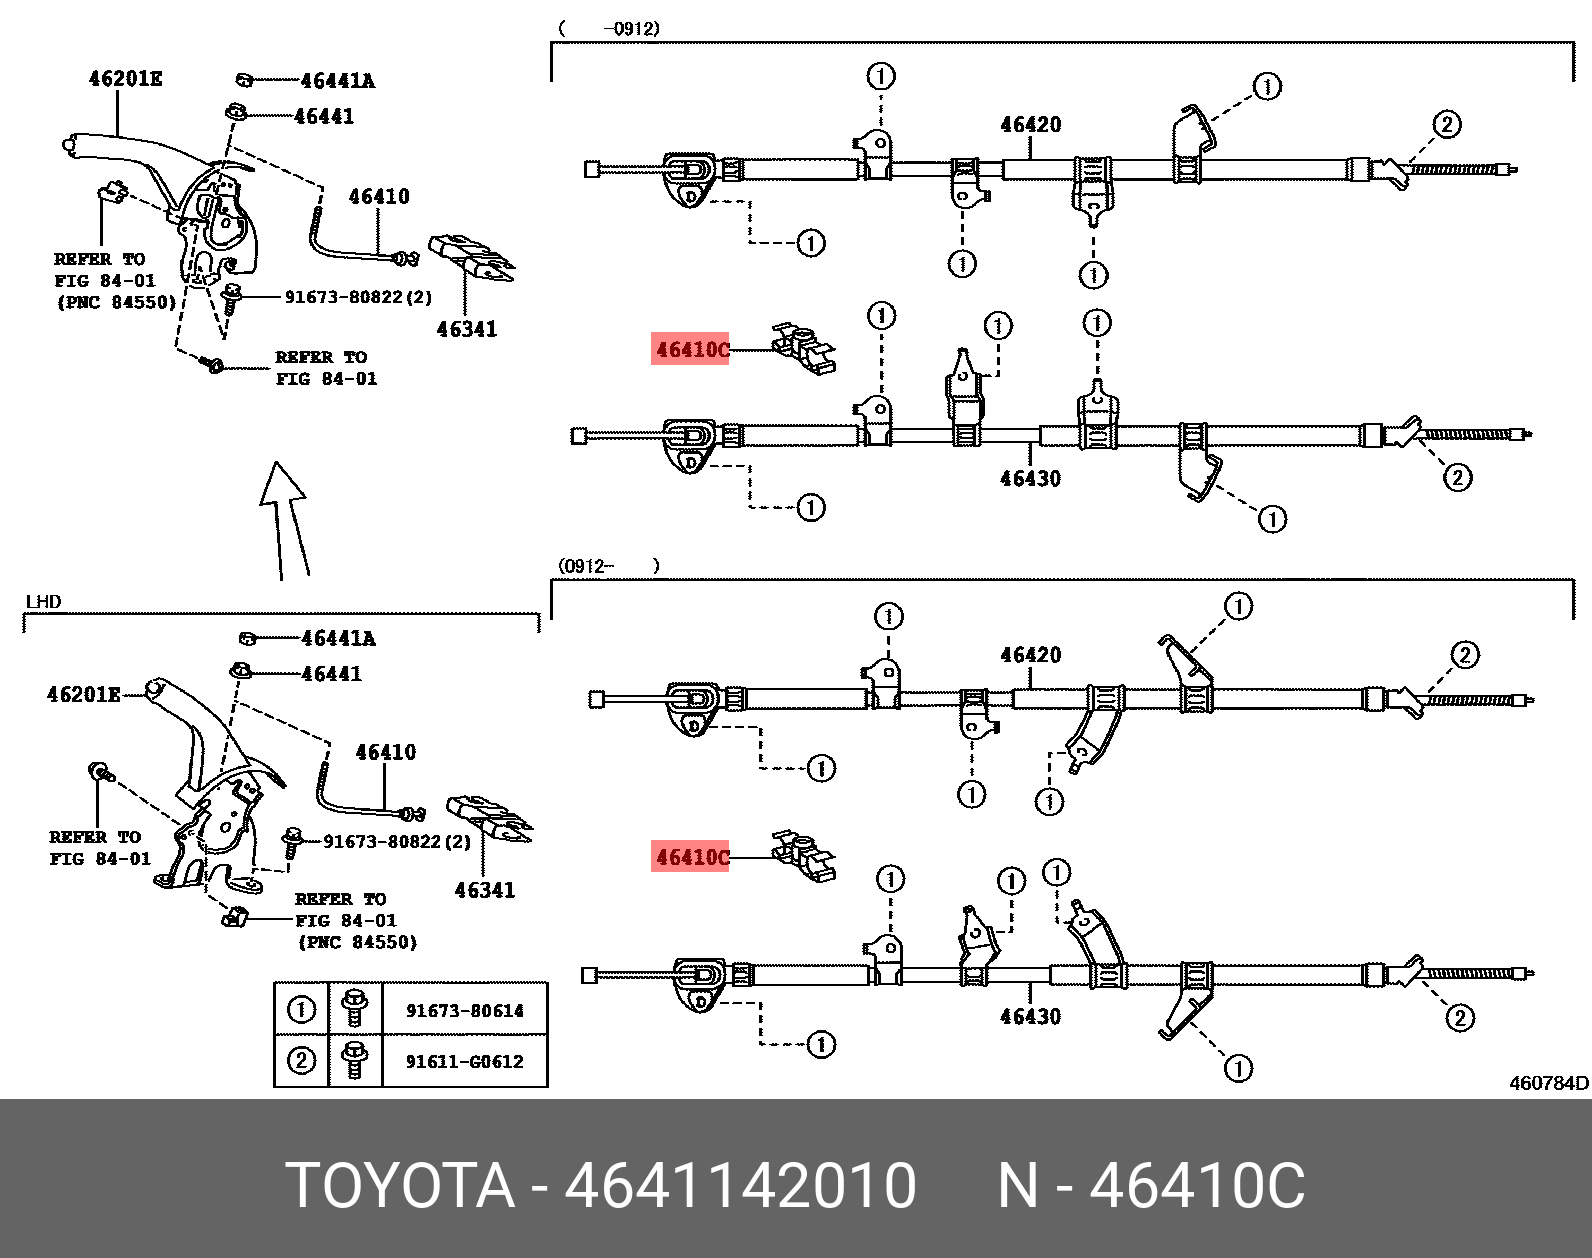 4641142010, HARRIER/ HYBRID 201312-202005, ASU6#, AVU65, ZSU6#, CLAMP(FOR PARKING BRAKE FRONT CABLE)